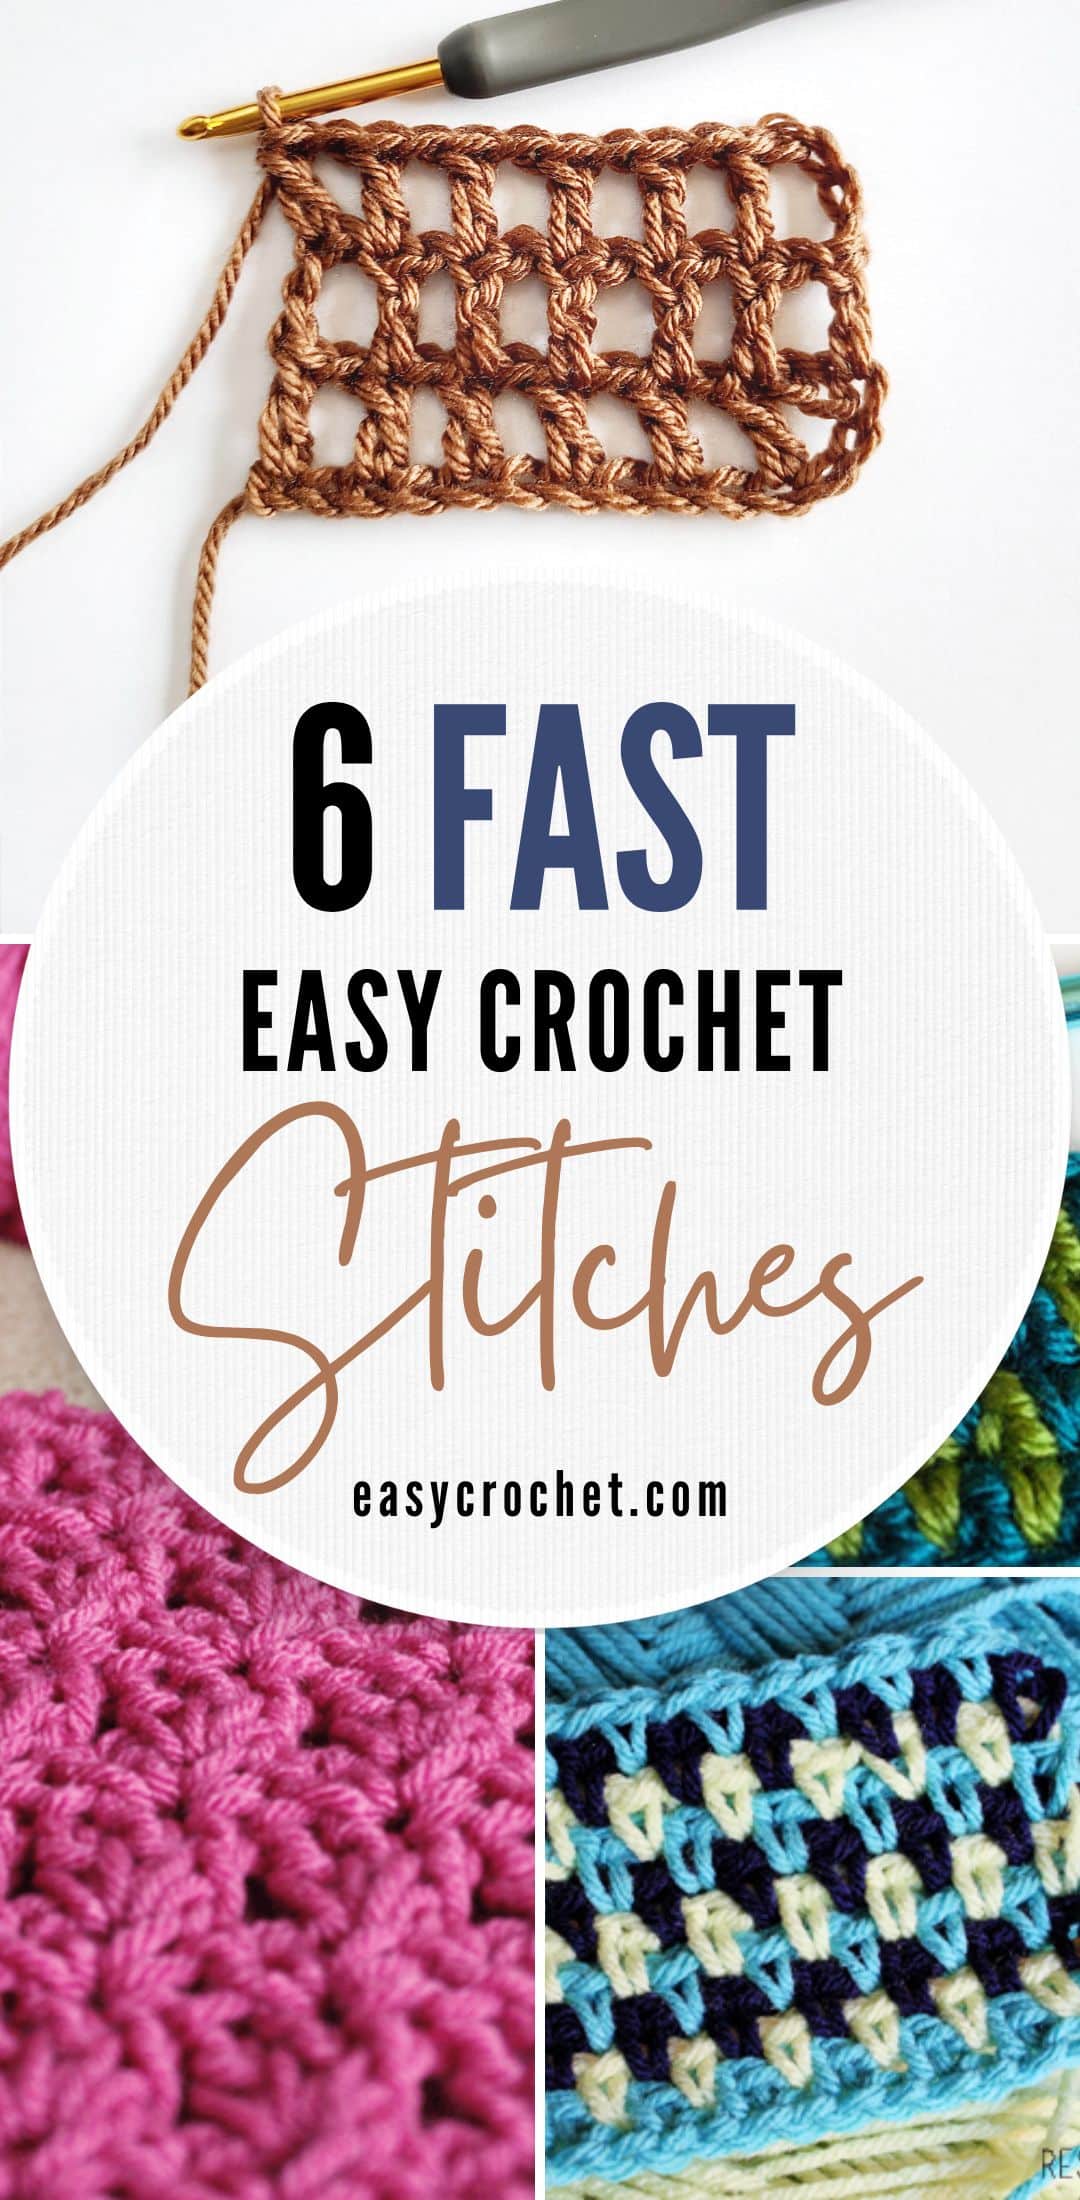 Fast Crochet stitches that you can use to crochet quickly. 